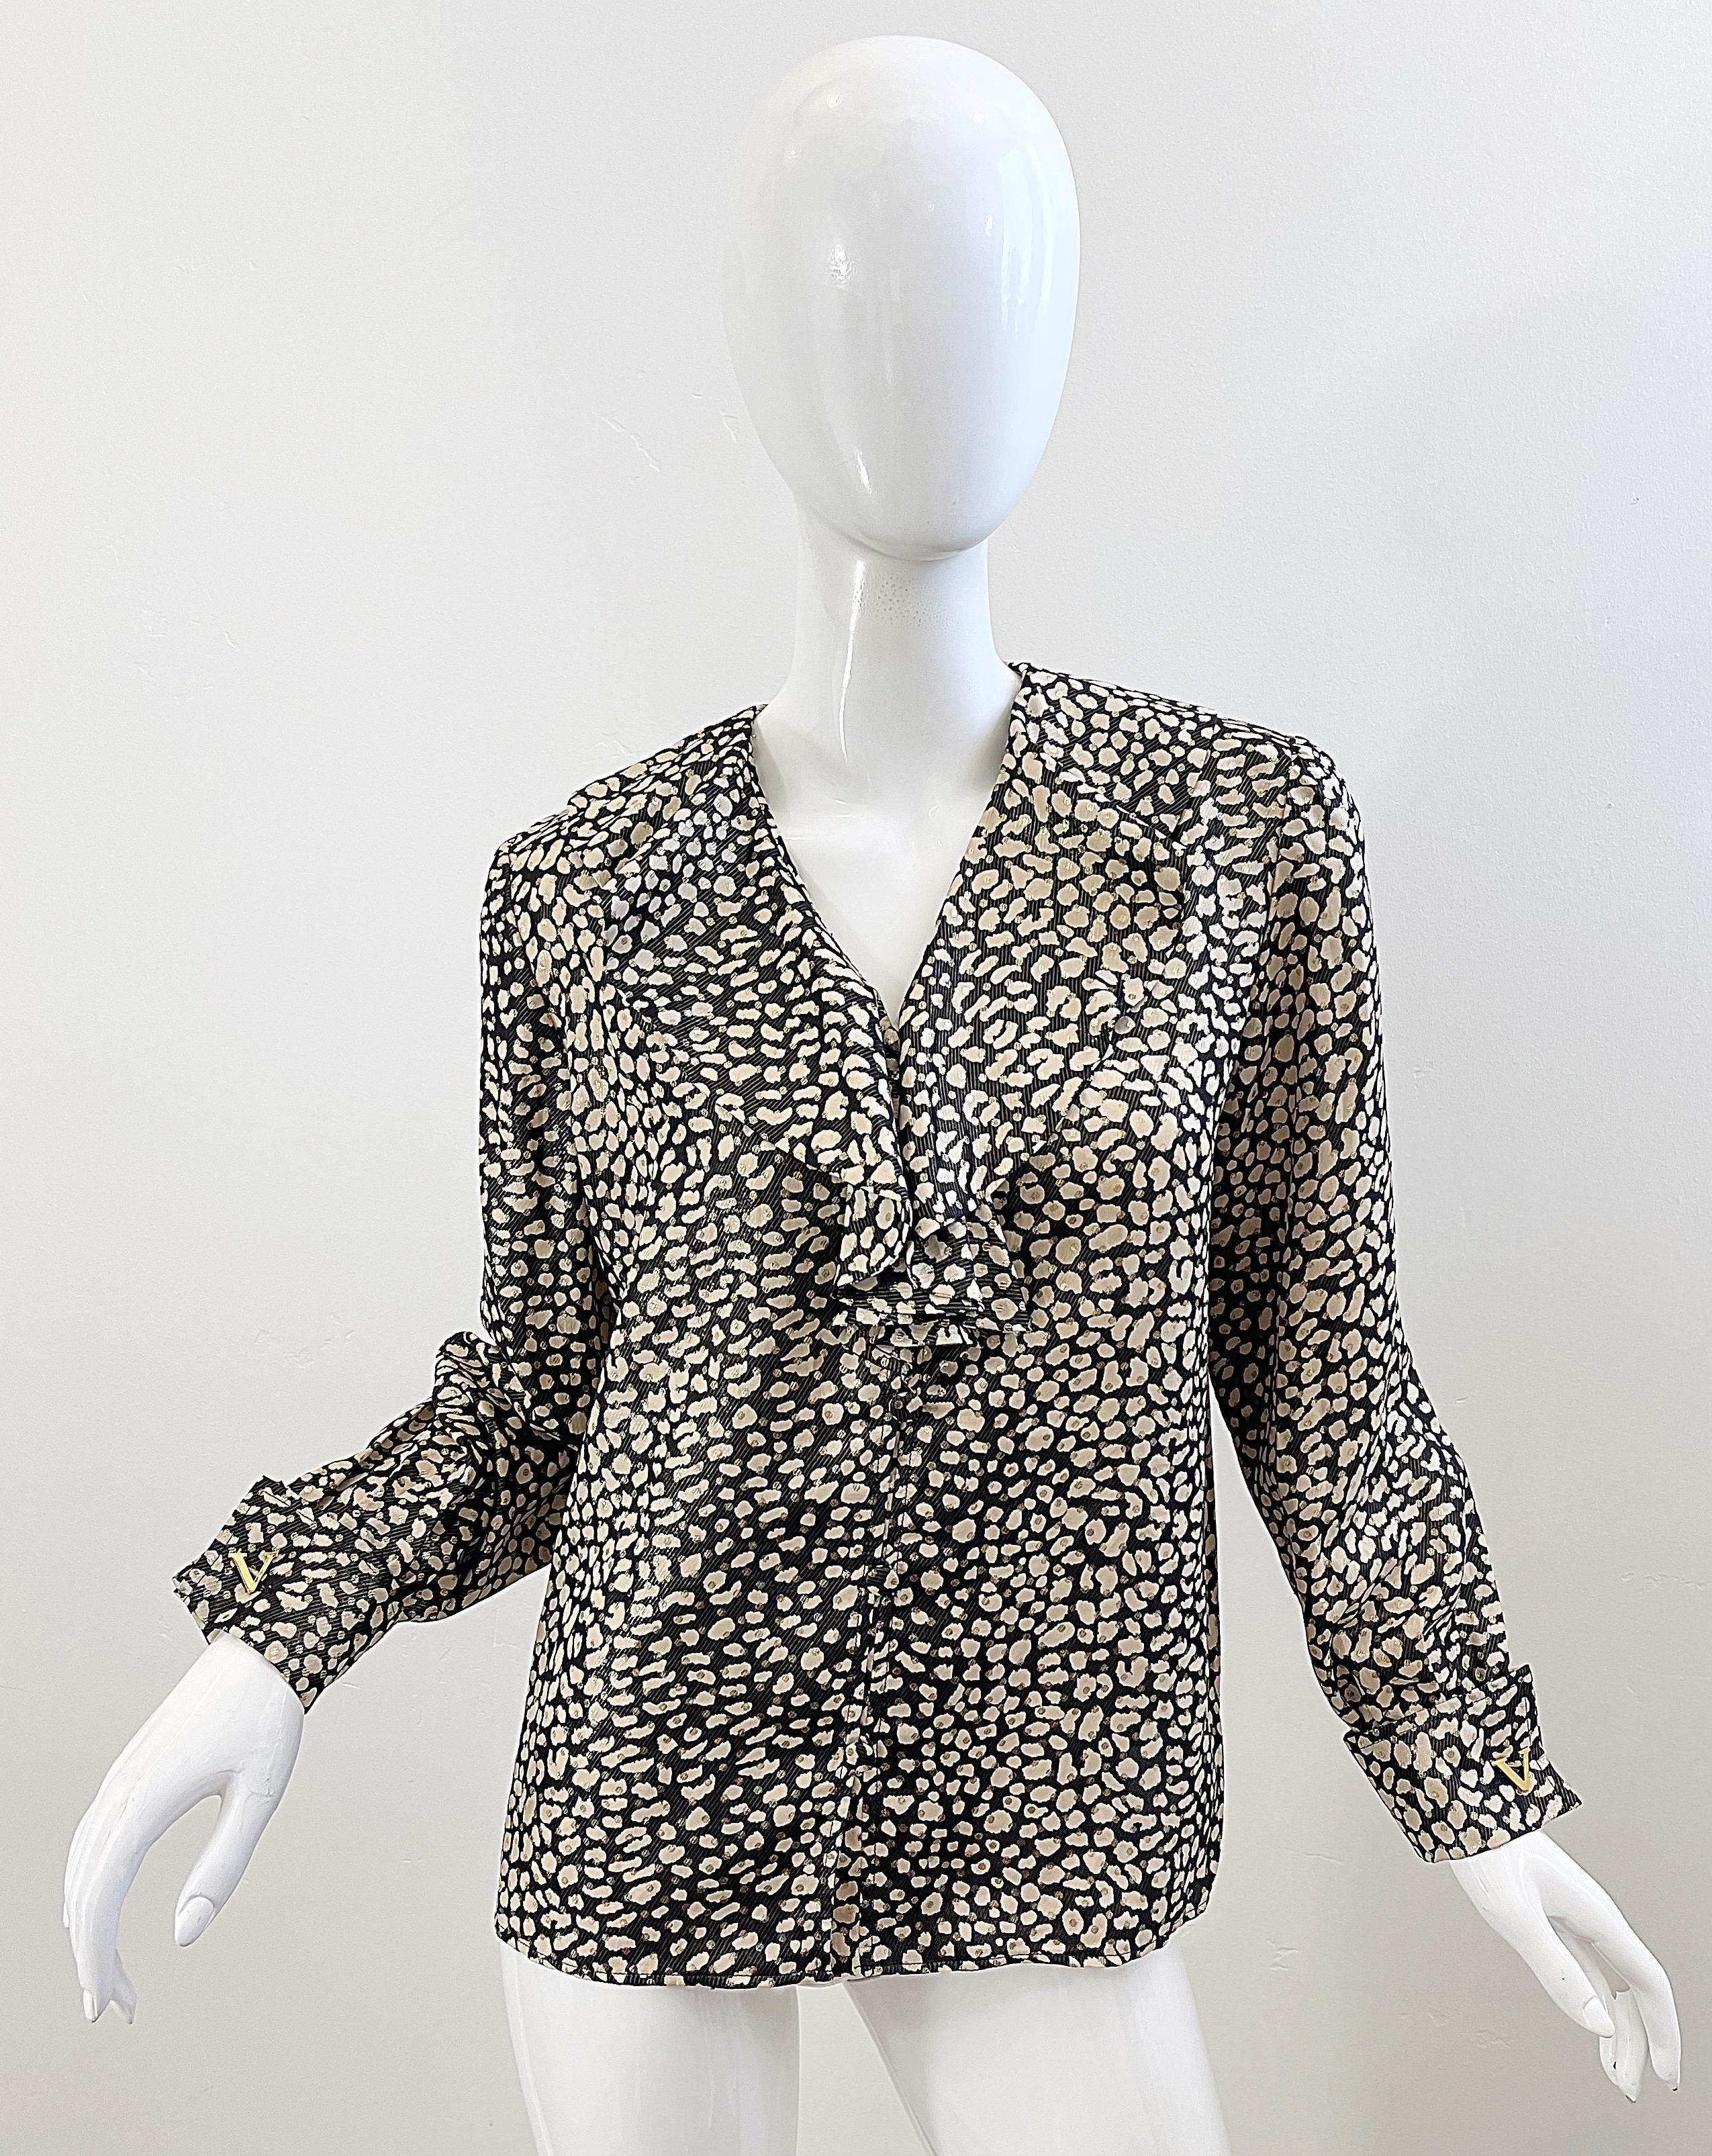 Chic vintage 90s VALENTINO MS V leopard animal print silk top ! Features black, ivory and gold metallic throughout. Gold V logo cufflinks at each sleeve cuff. Buttons up the front with ruffles around the neckline. 
Pair with jeans, trousers, shorts